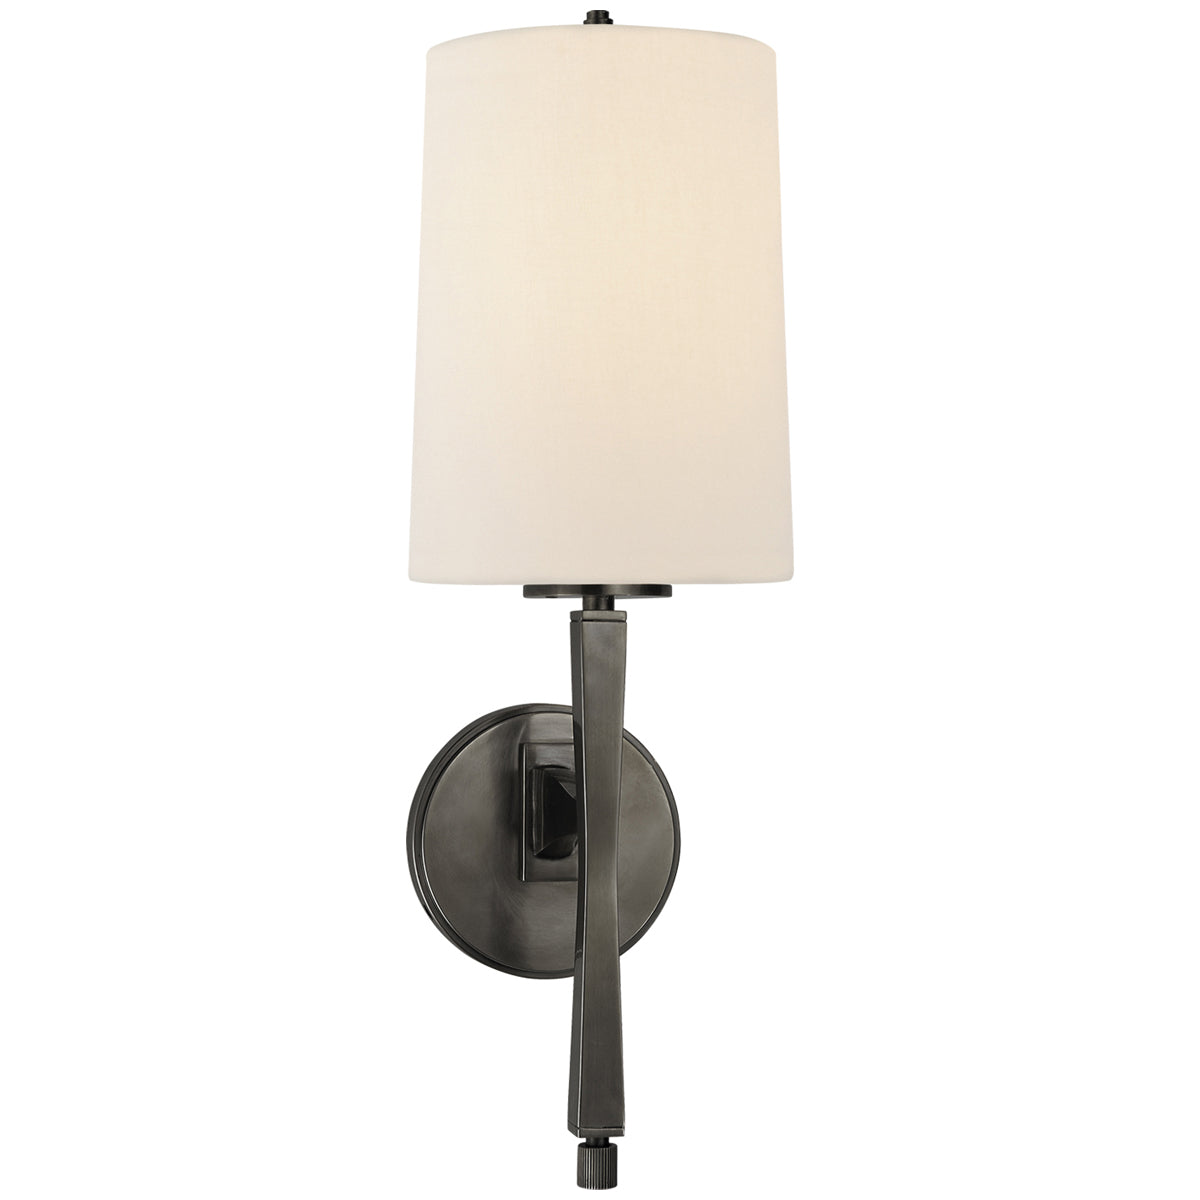 Visual Comfort Edie Sconce with Linen Shade